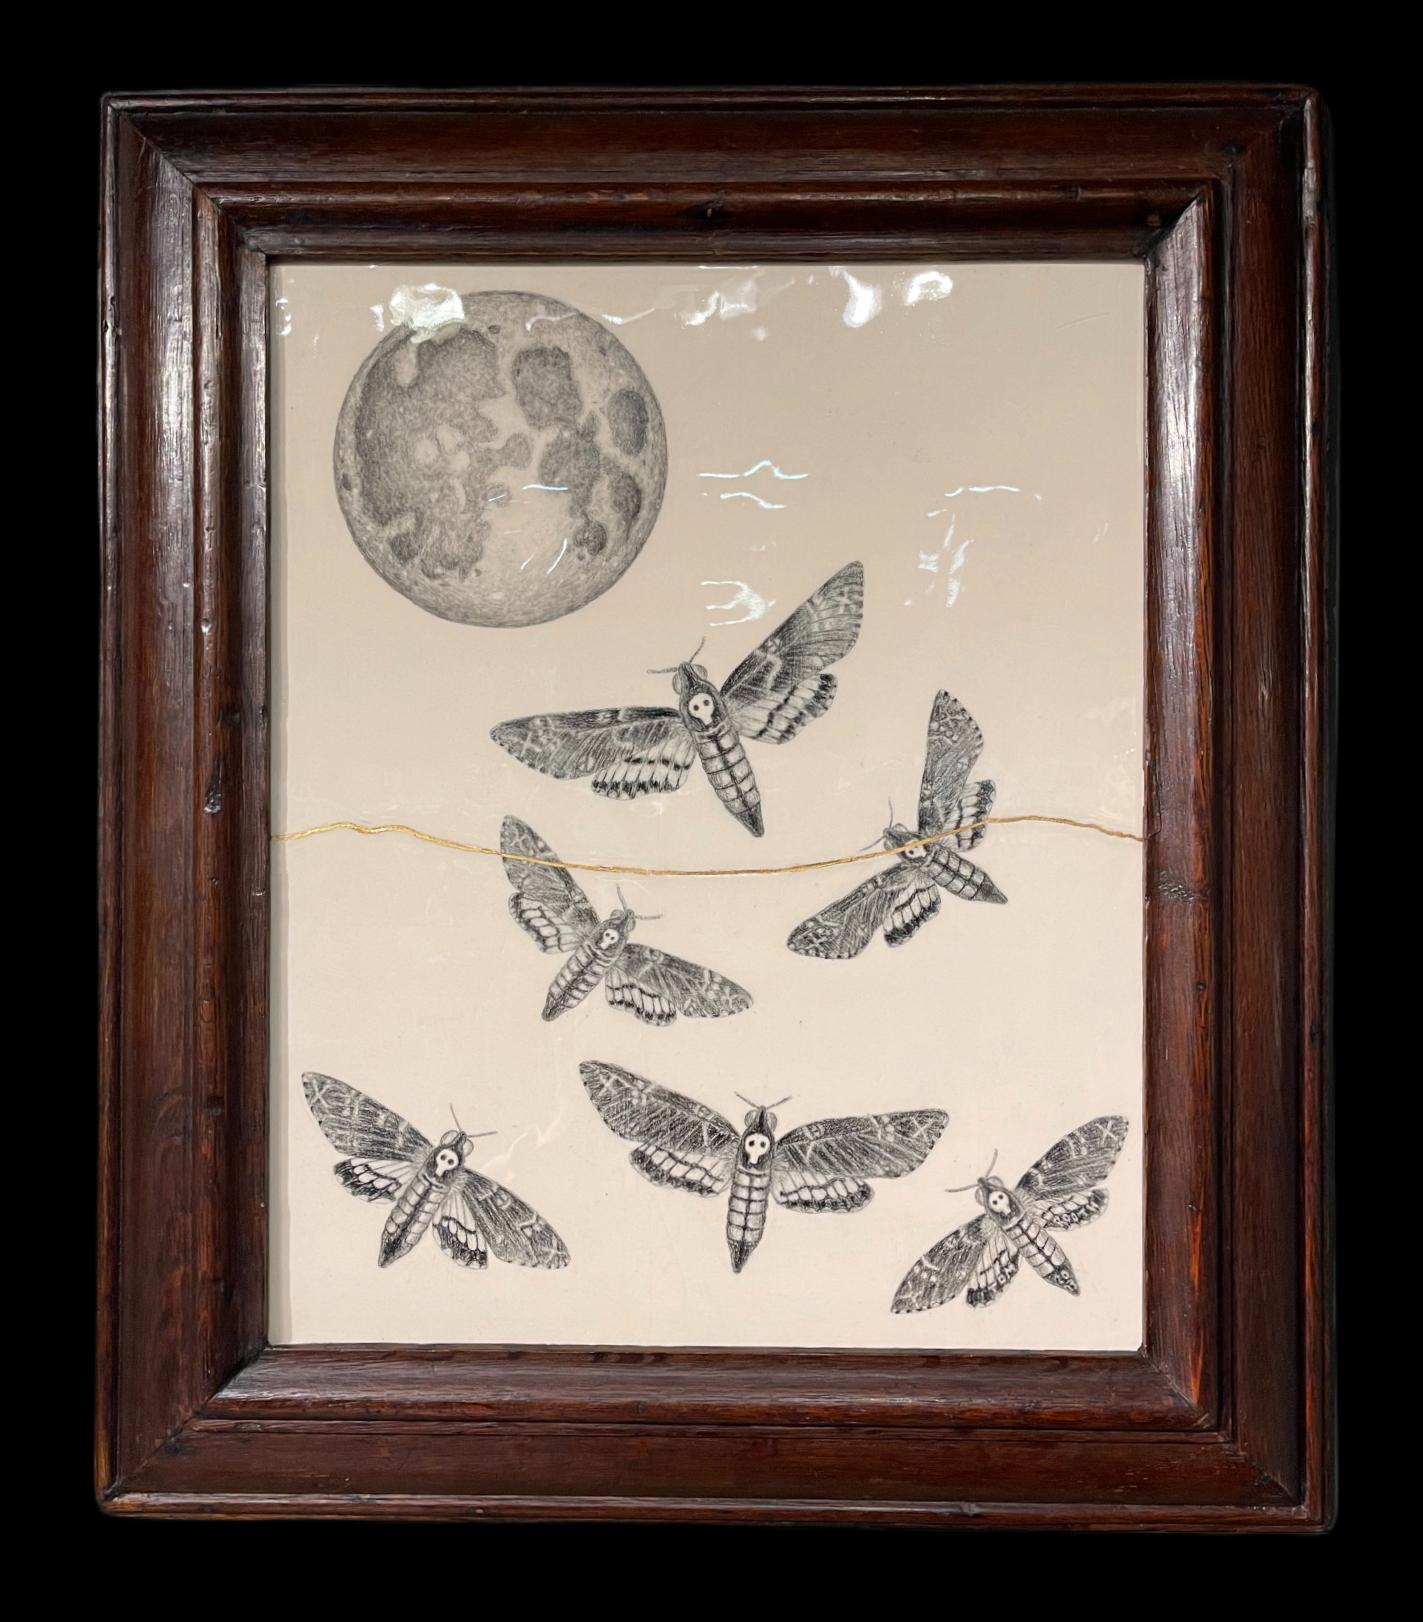 Death's head moths under a full-moon, presented in a hand-carved c1880 oak frame - Mixed Media Art by Tom Rooth